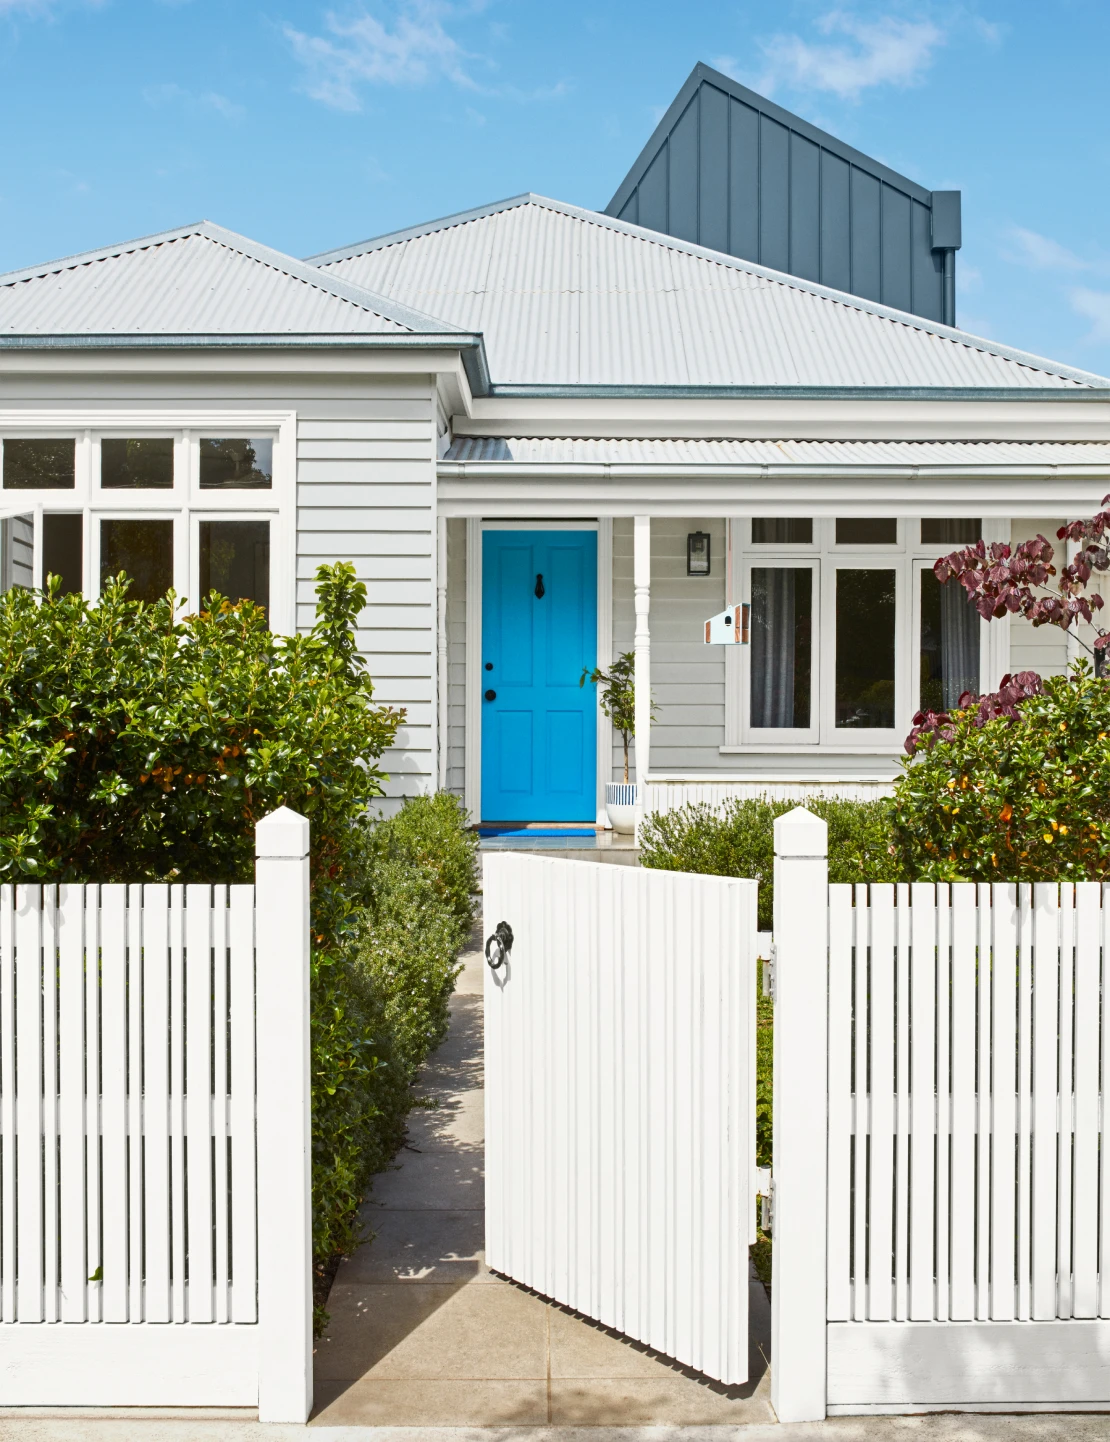 How to repaint a picket fence